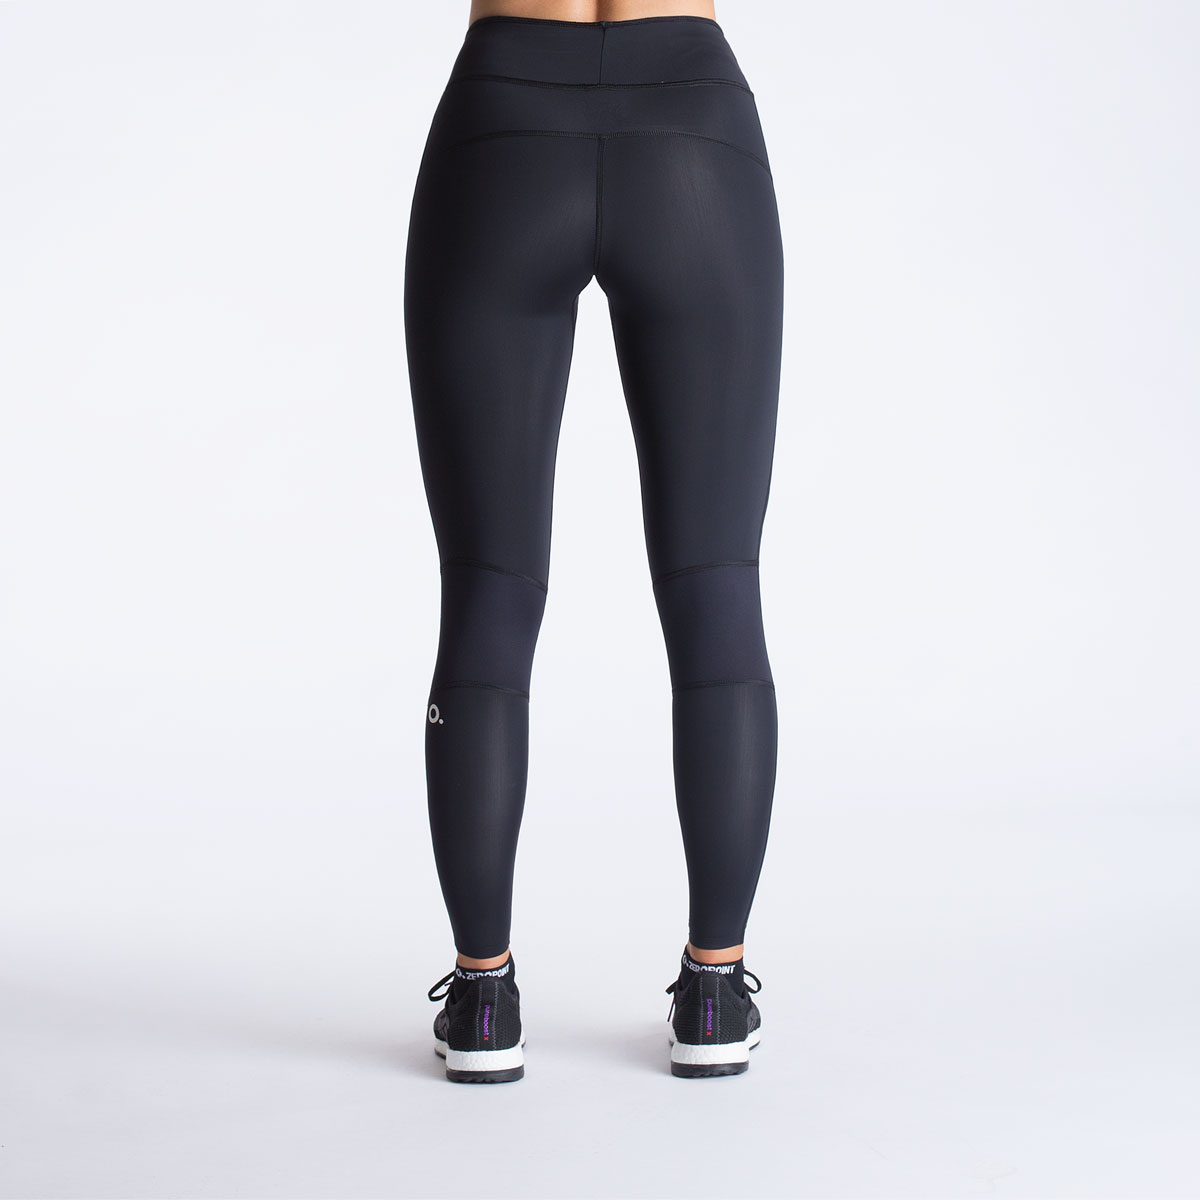 Athletic Compression tights | ZeroPoint